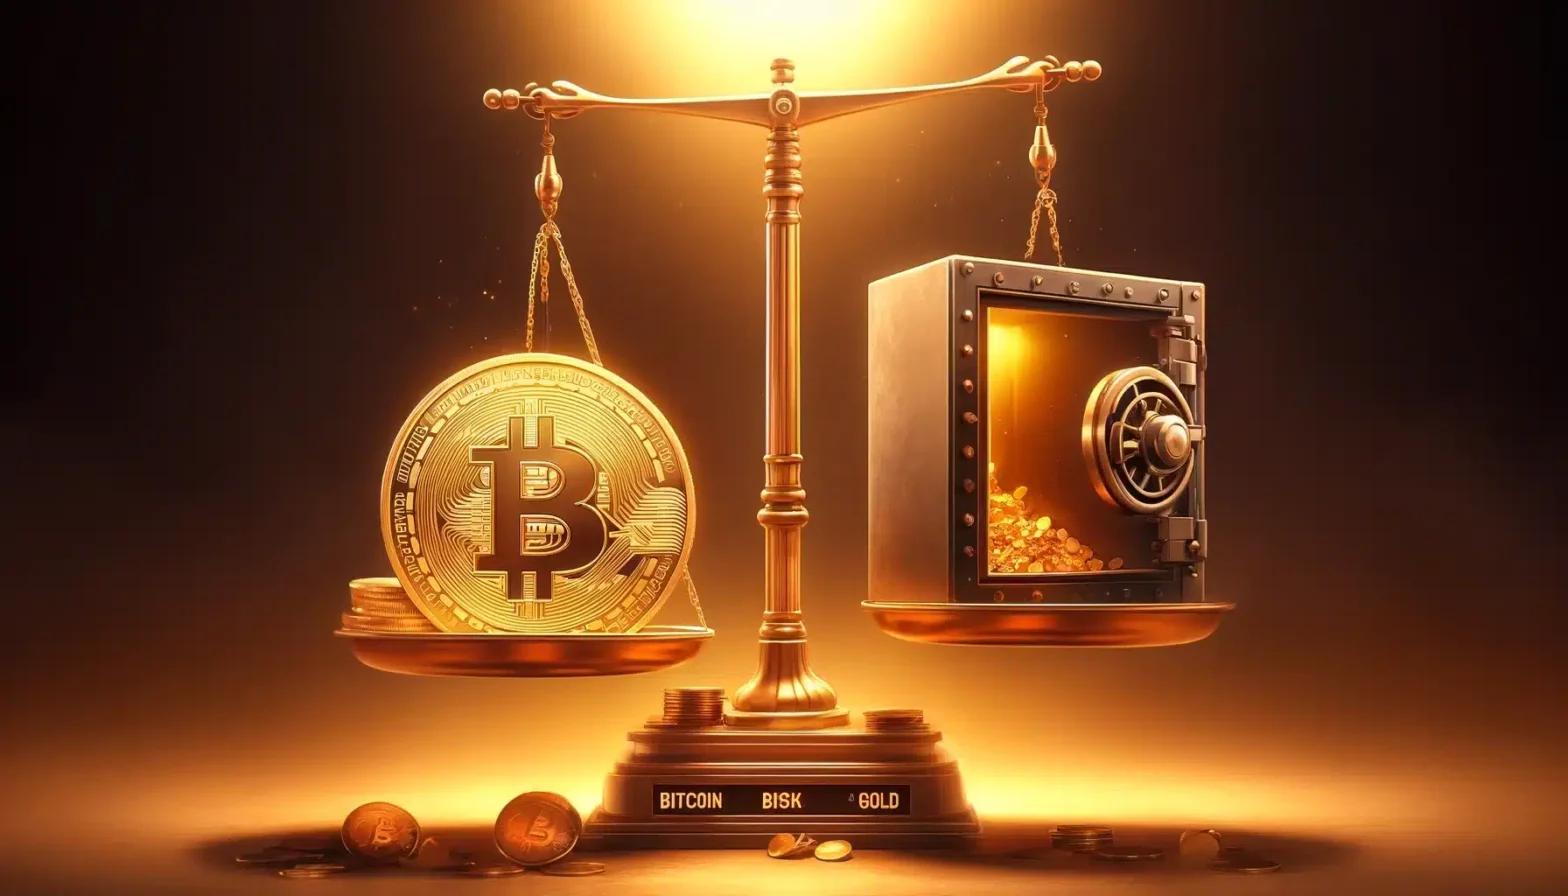 Bitcoin, a better investment option than gold now? A Sharpe look says…